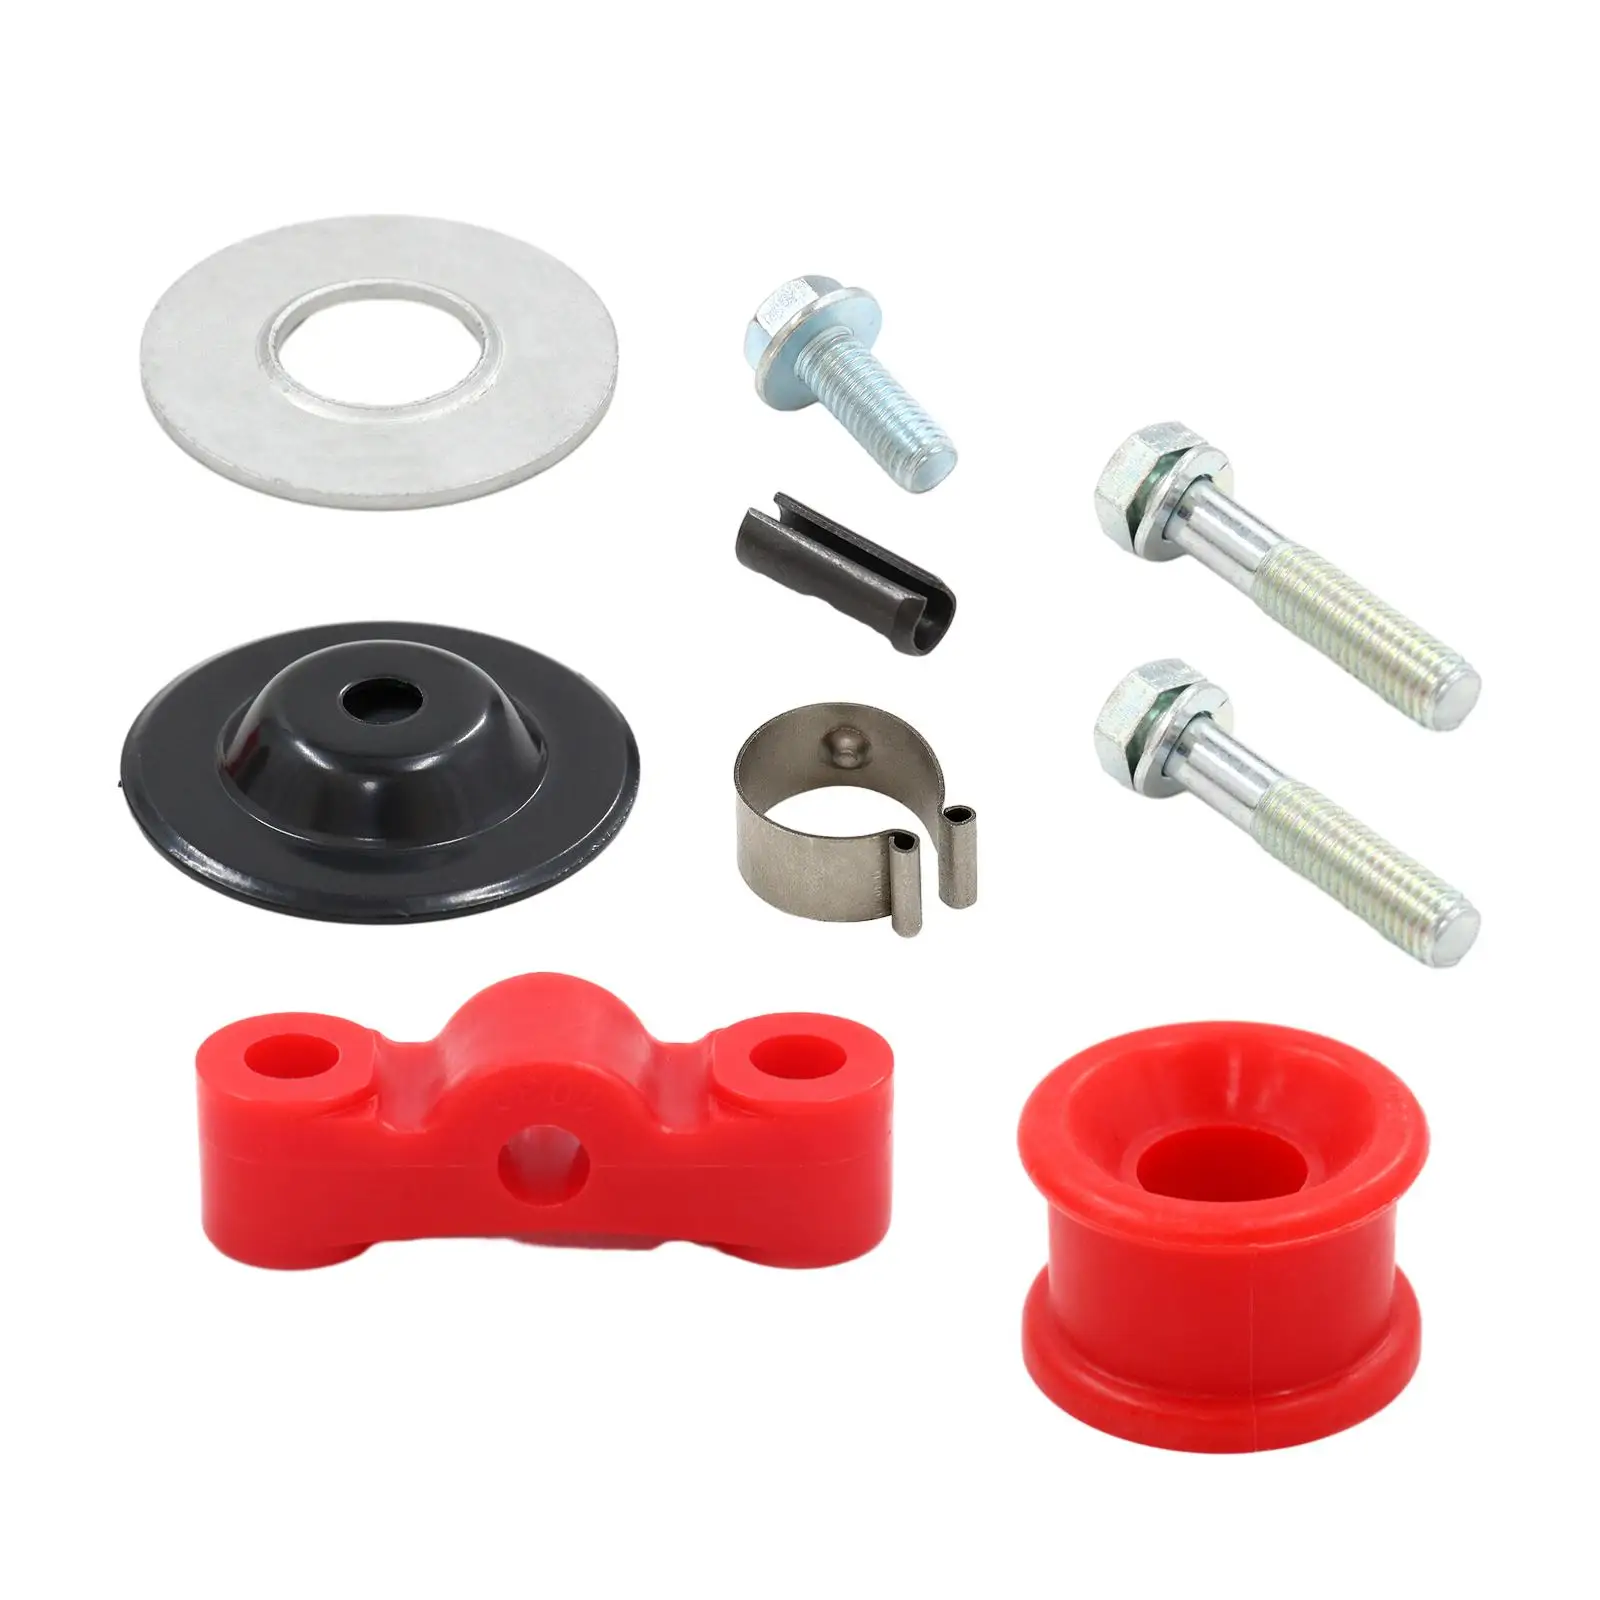 Red Shift Linkage Bushings Kit Durable C Clip and Bolt for Honda Crx Civic Stable Performance High Reliability